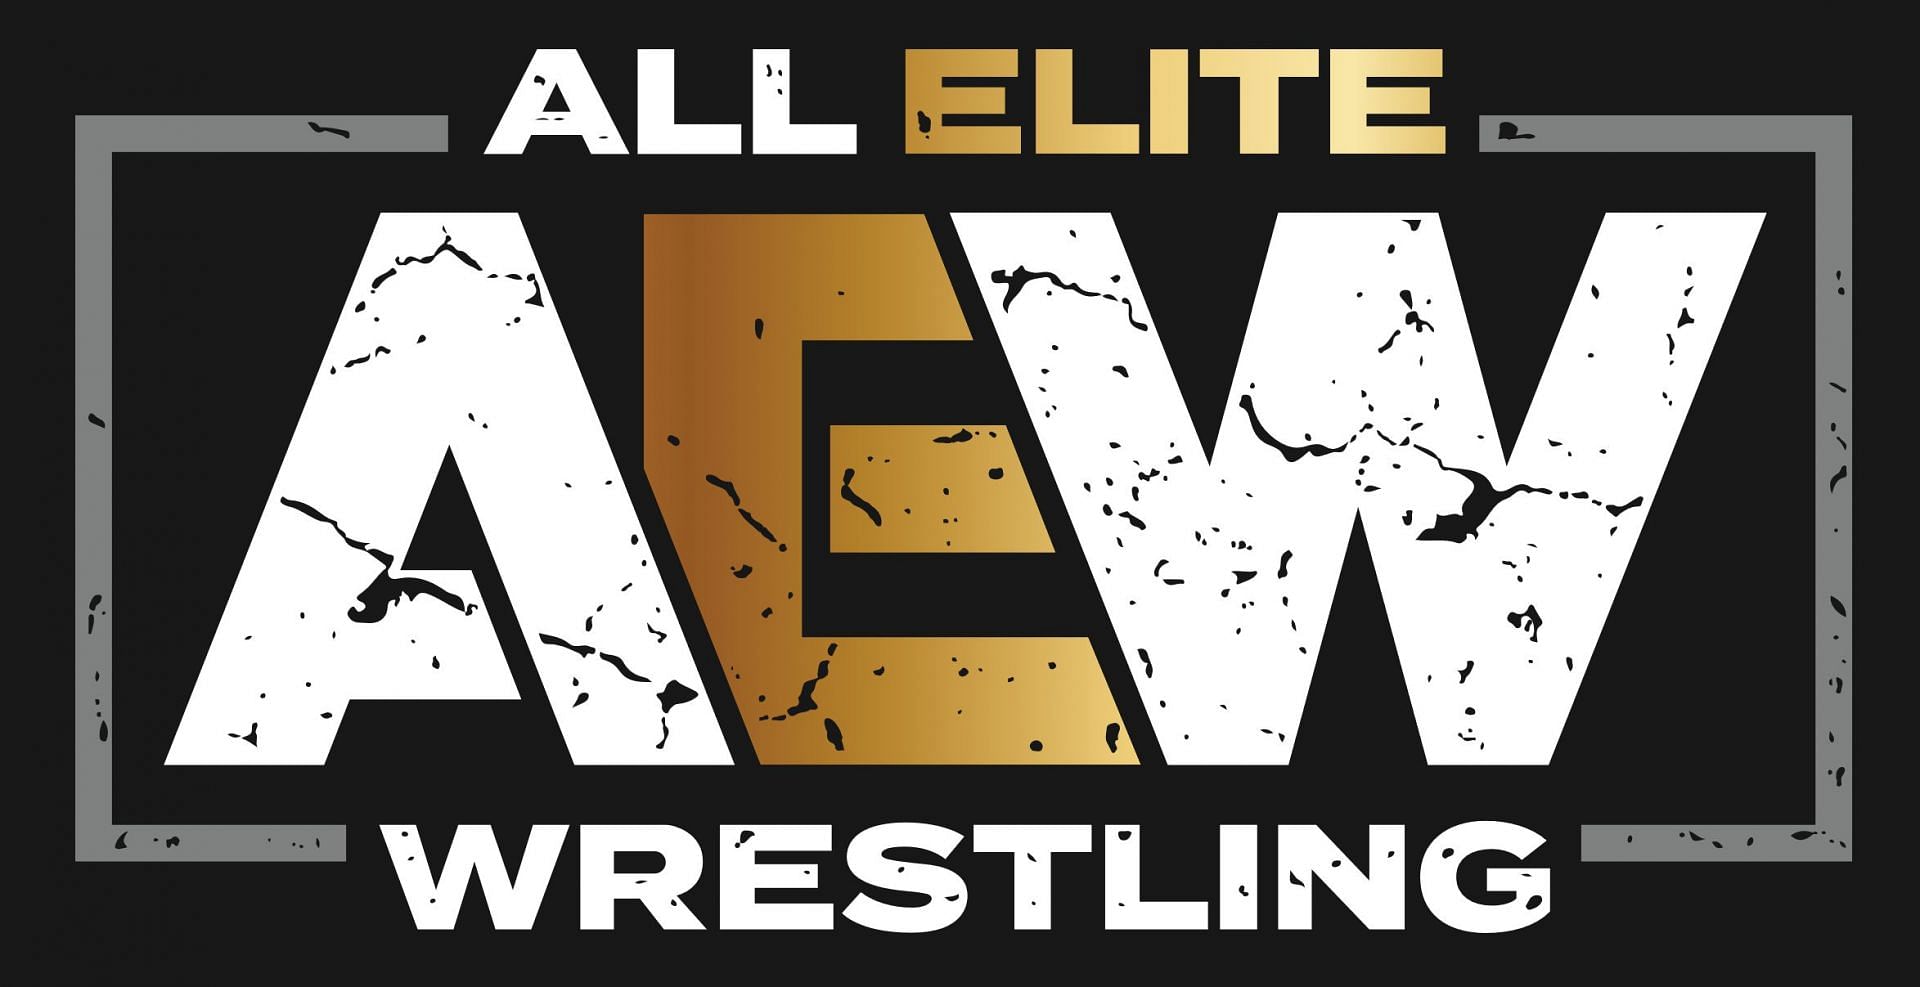 Former AEW star discusses about her future after being released